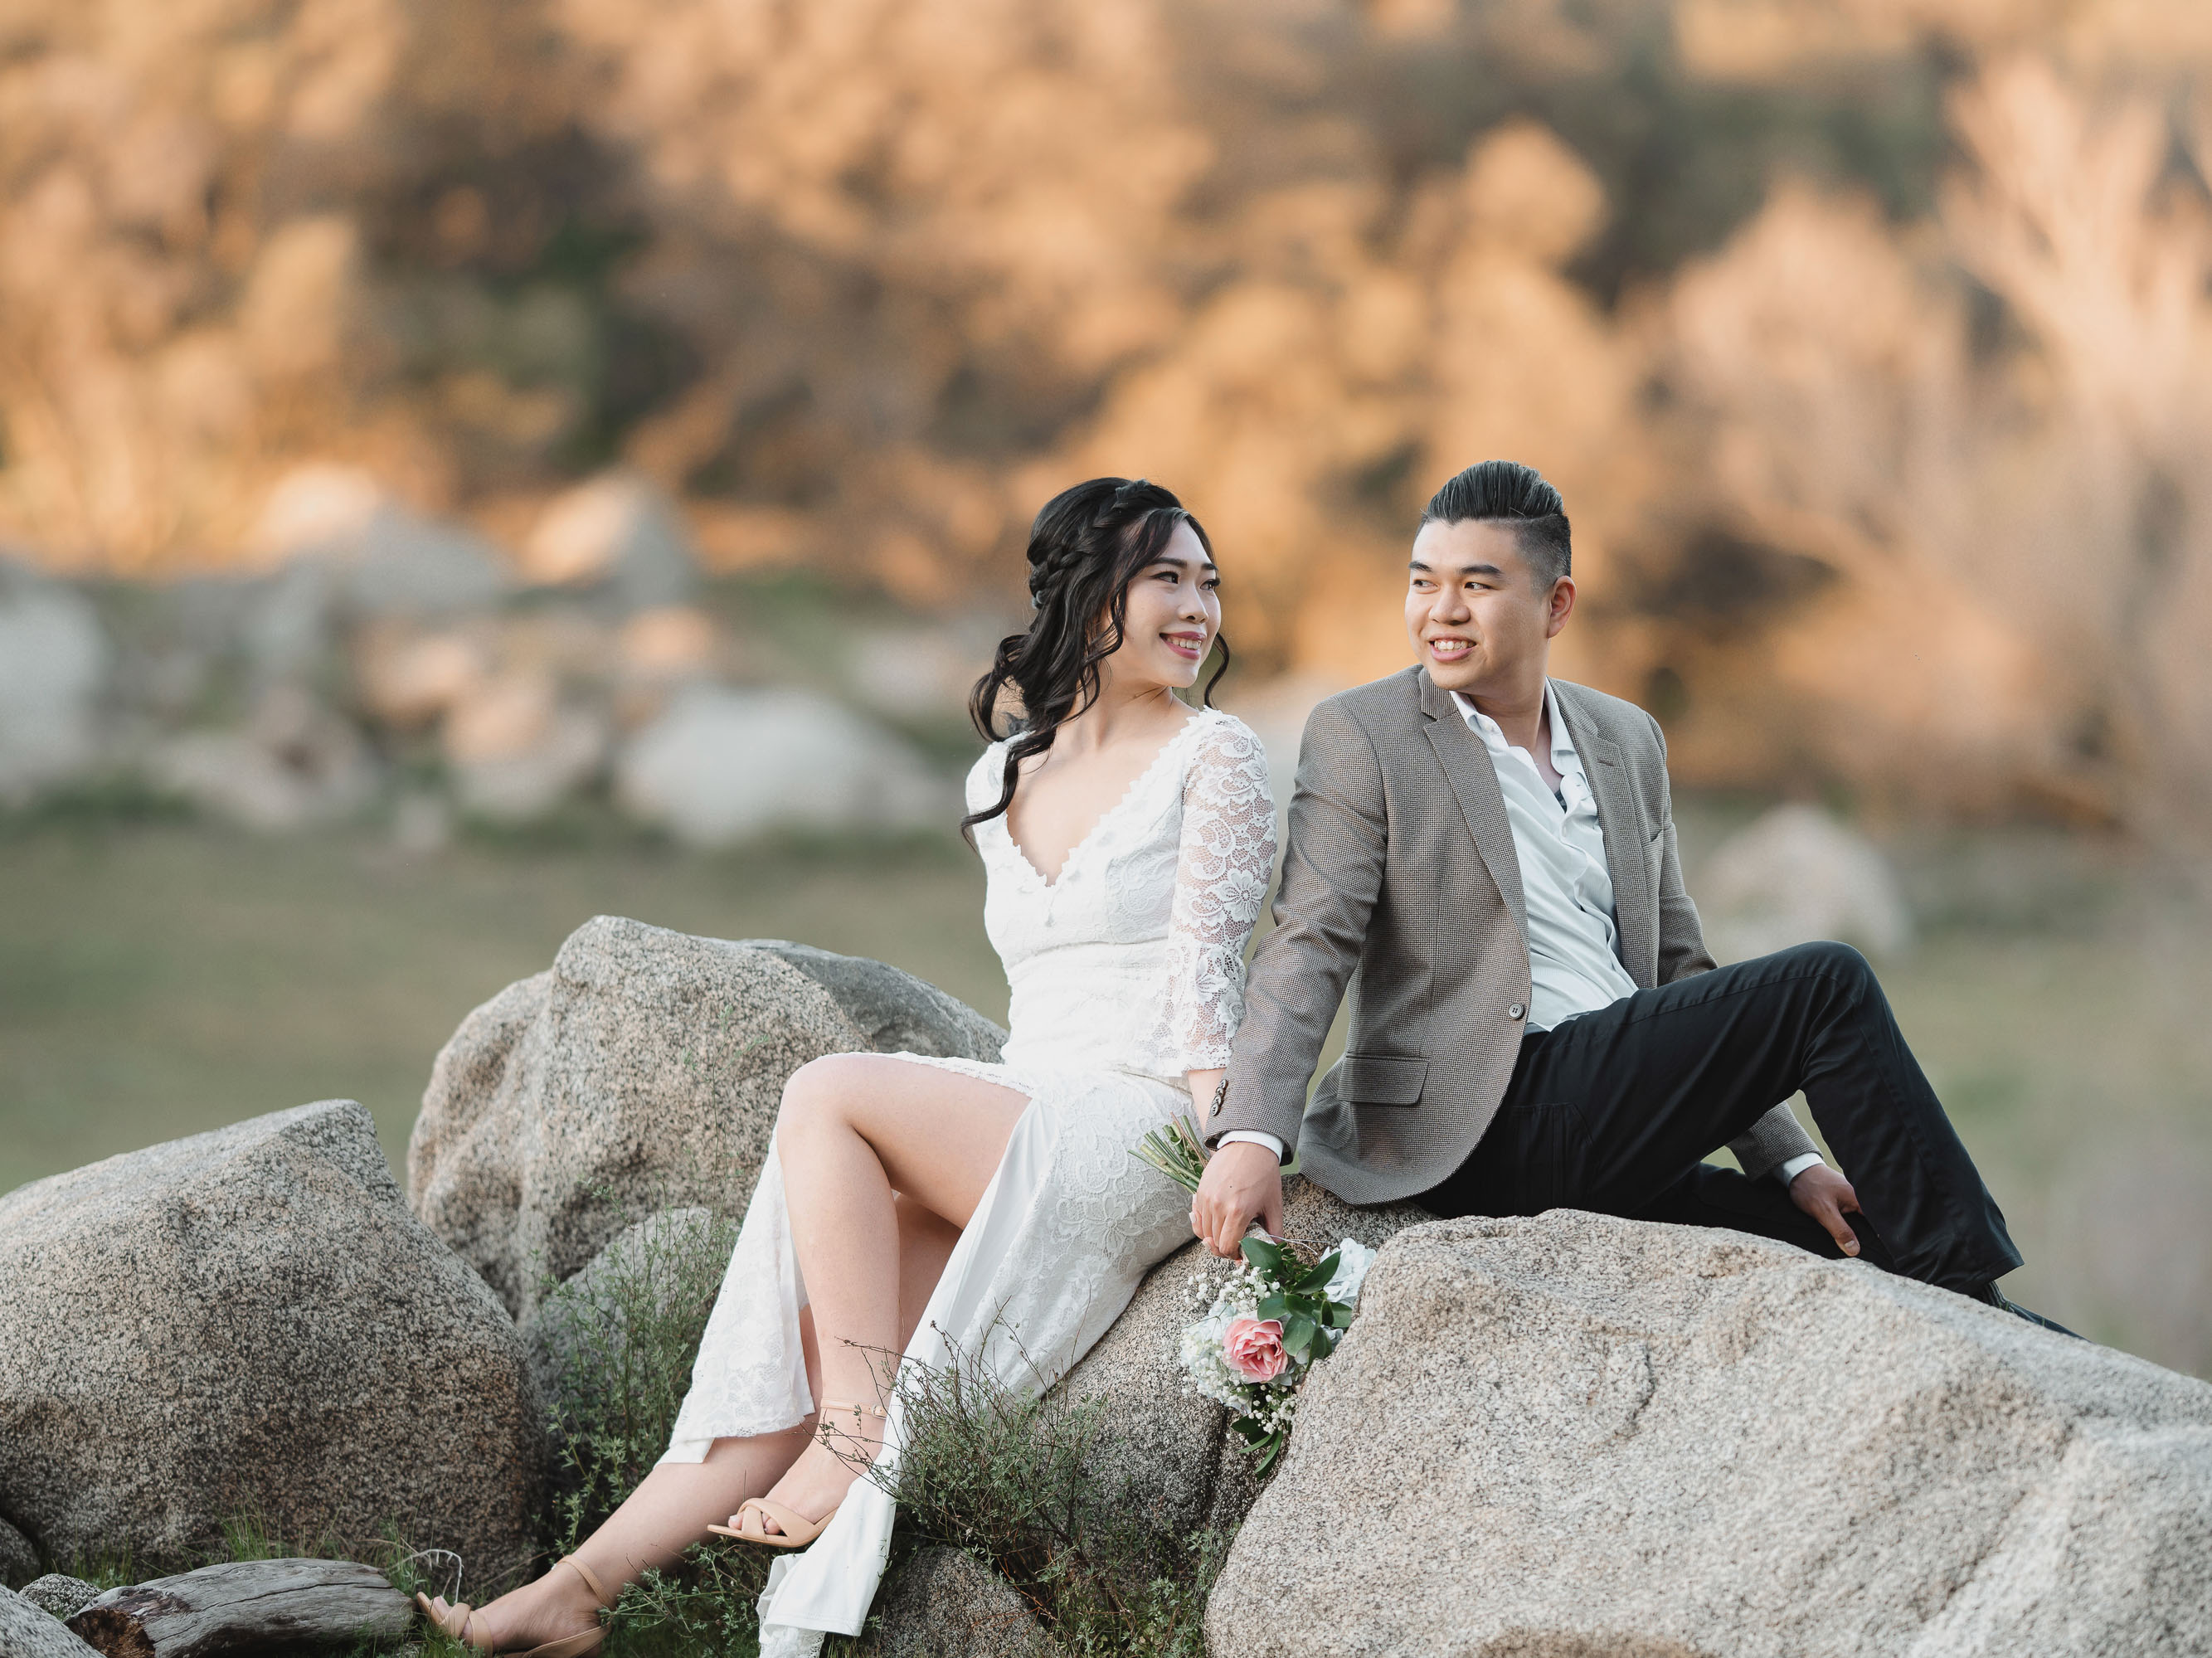 A bride and groom sitting on rocks during their elopement.